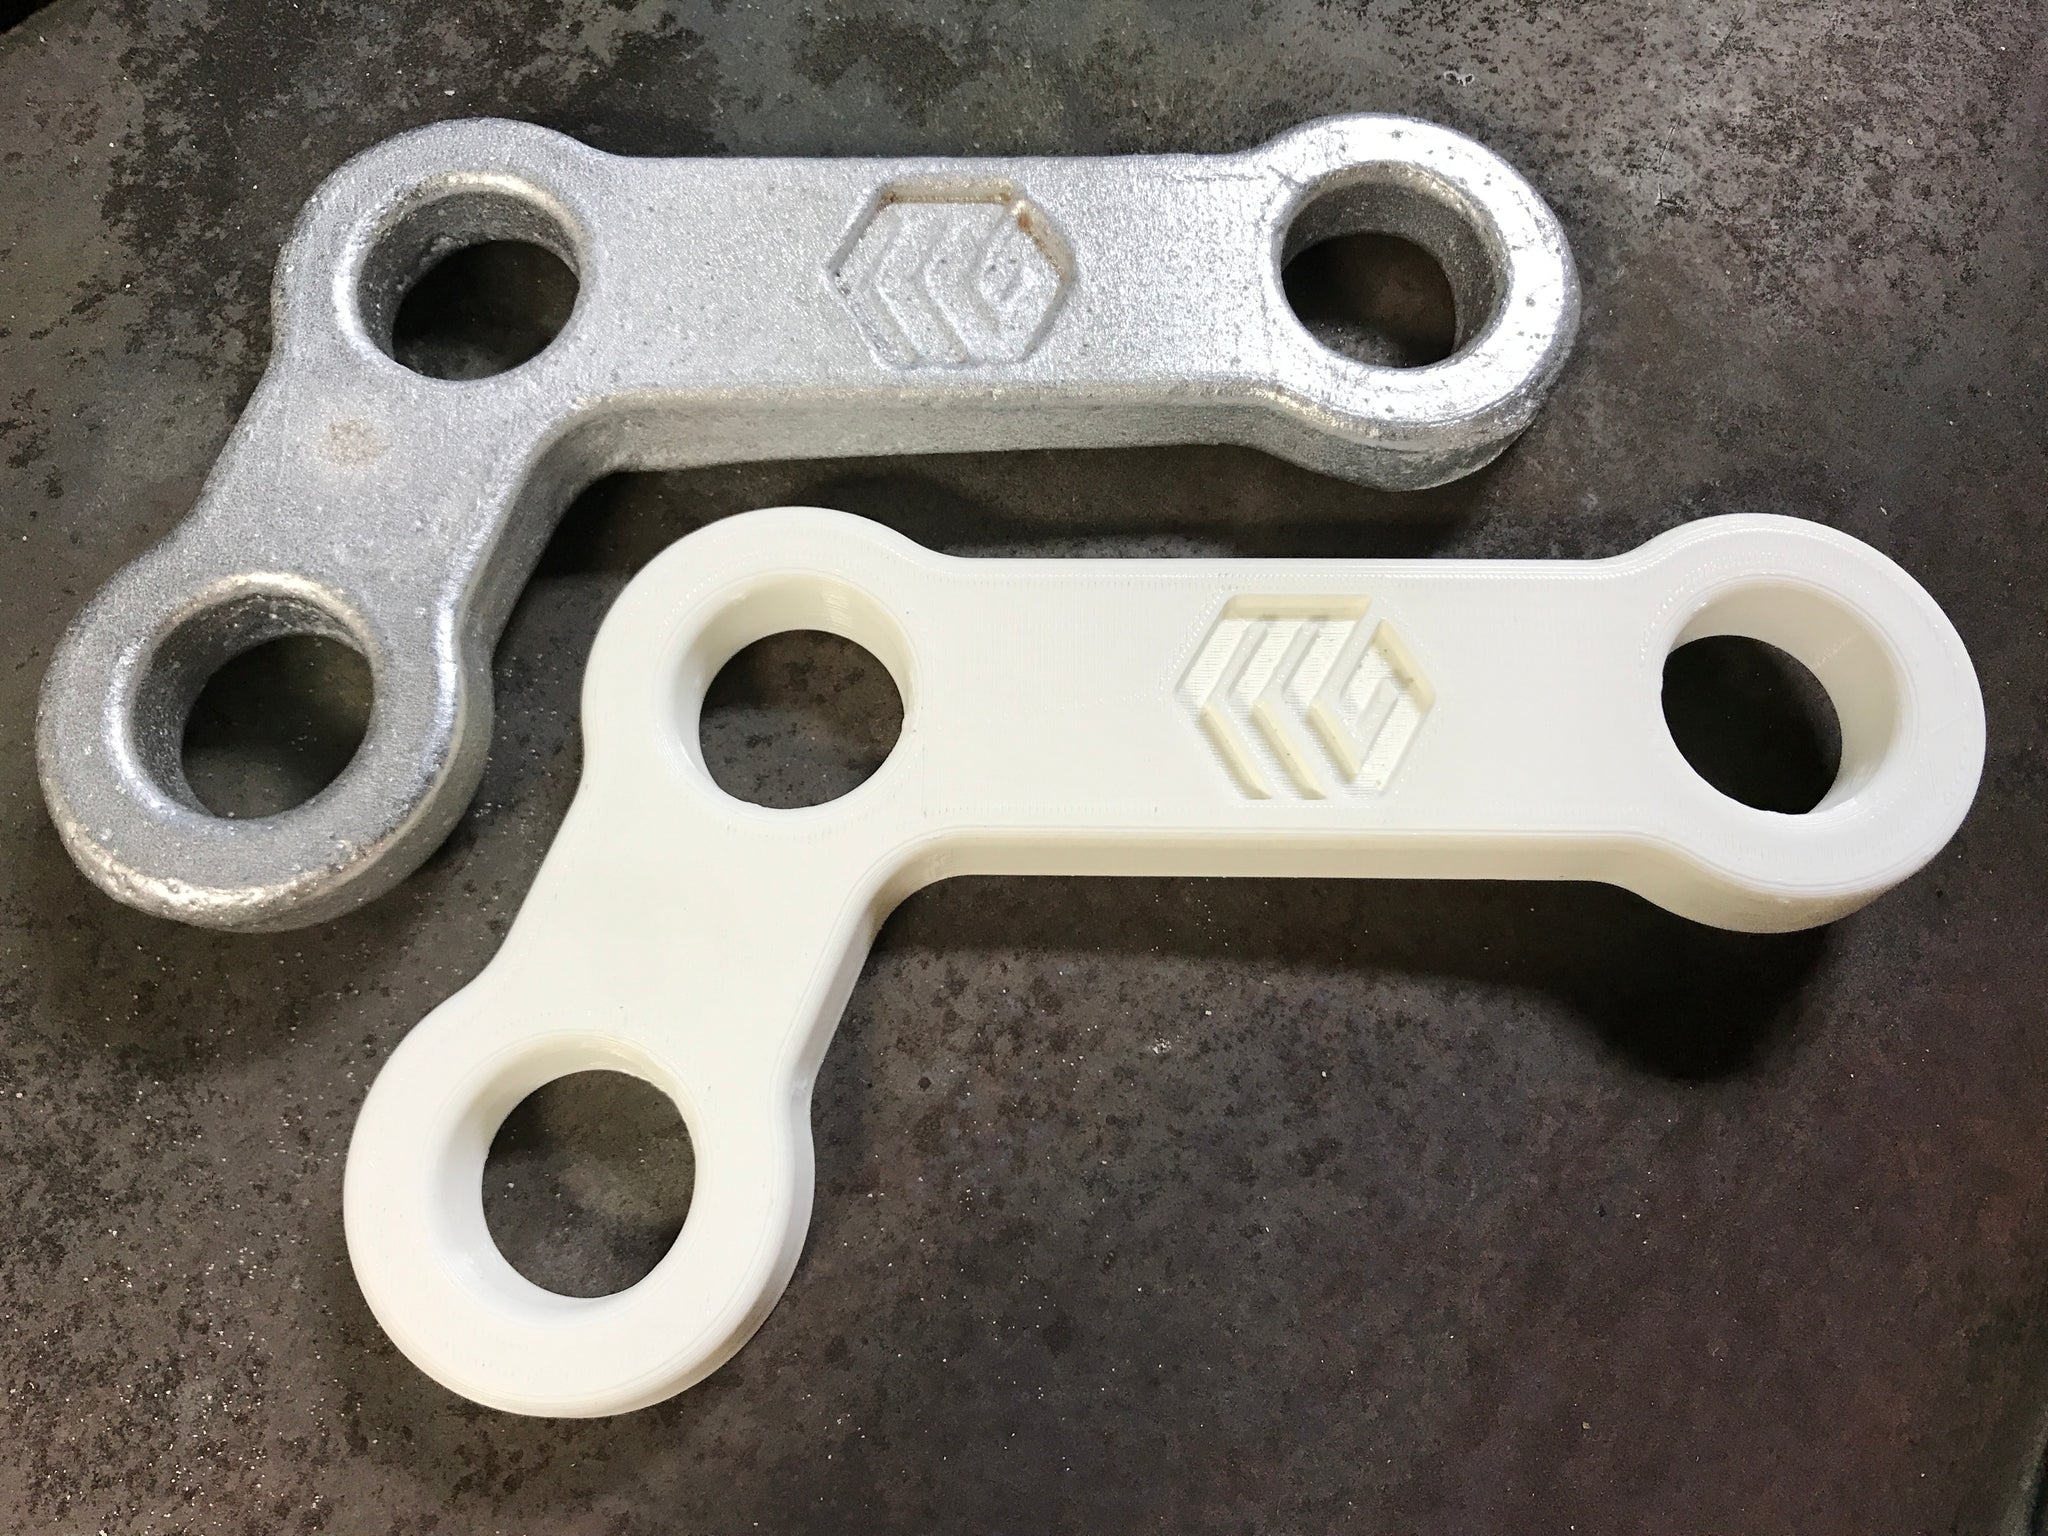 Introduction to Metal Casting and Ways to Combine 3D Printing With